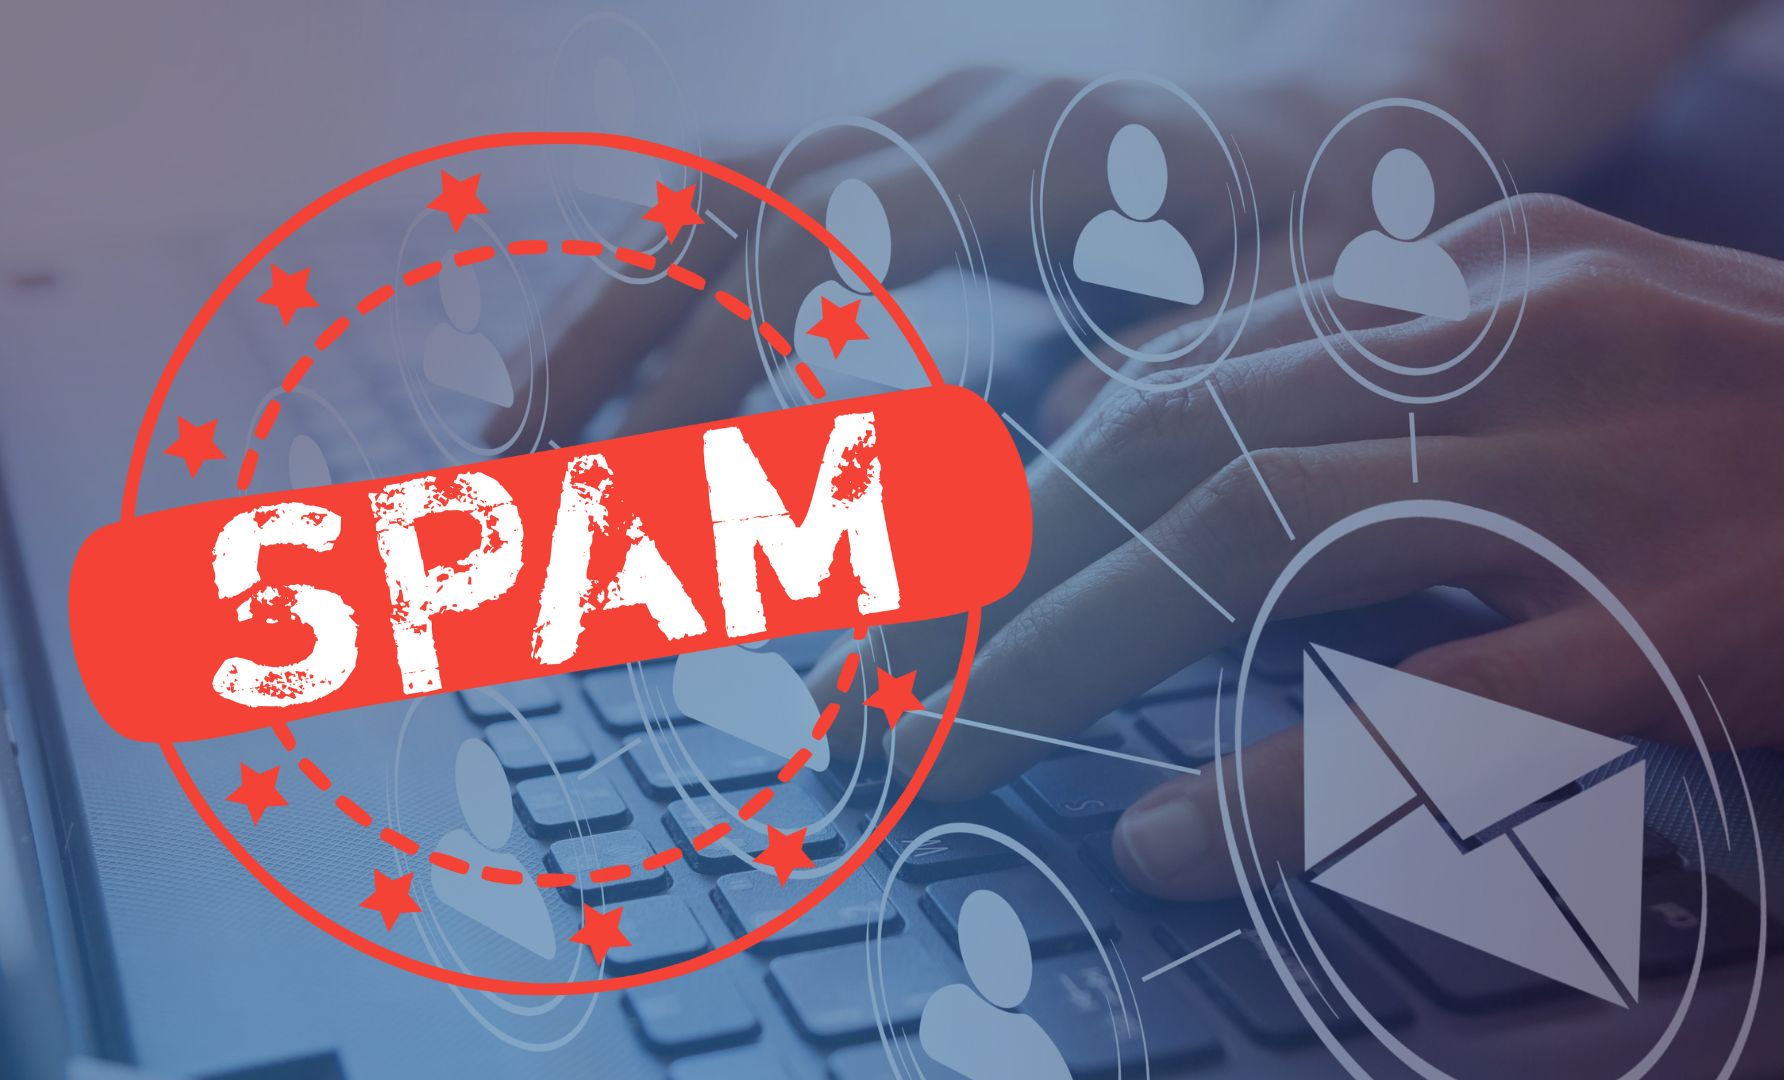 Hotmail: The latest spam failure is Microsoft’s difficulty